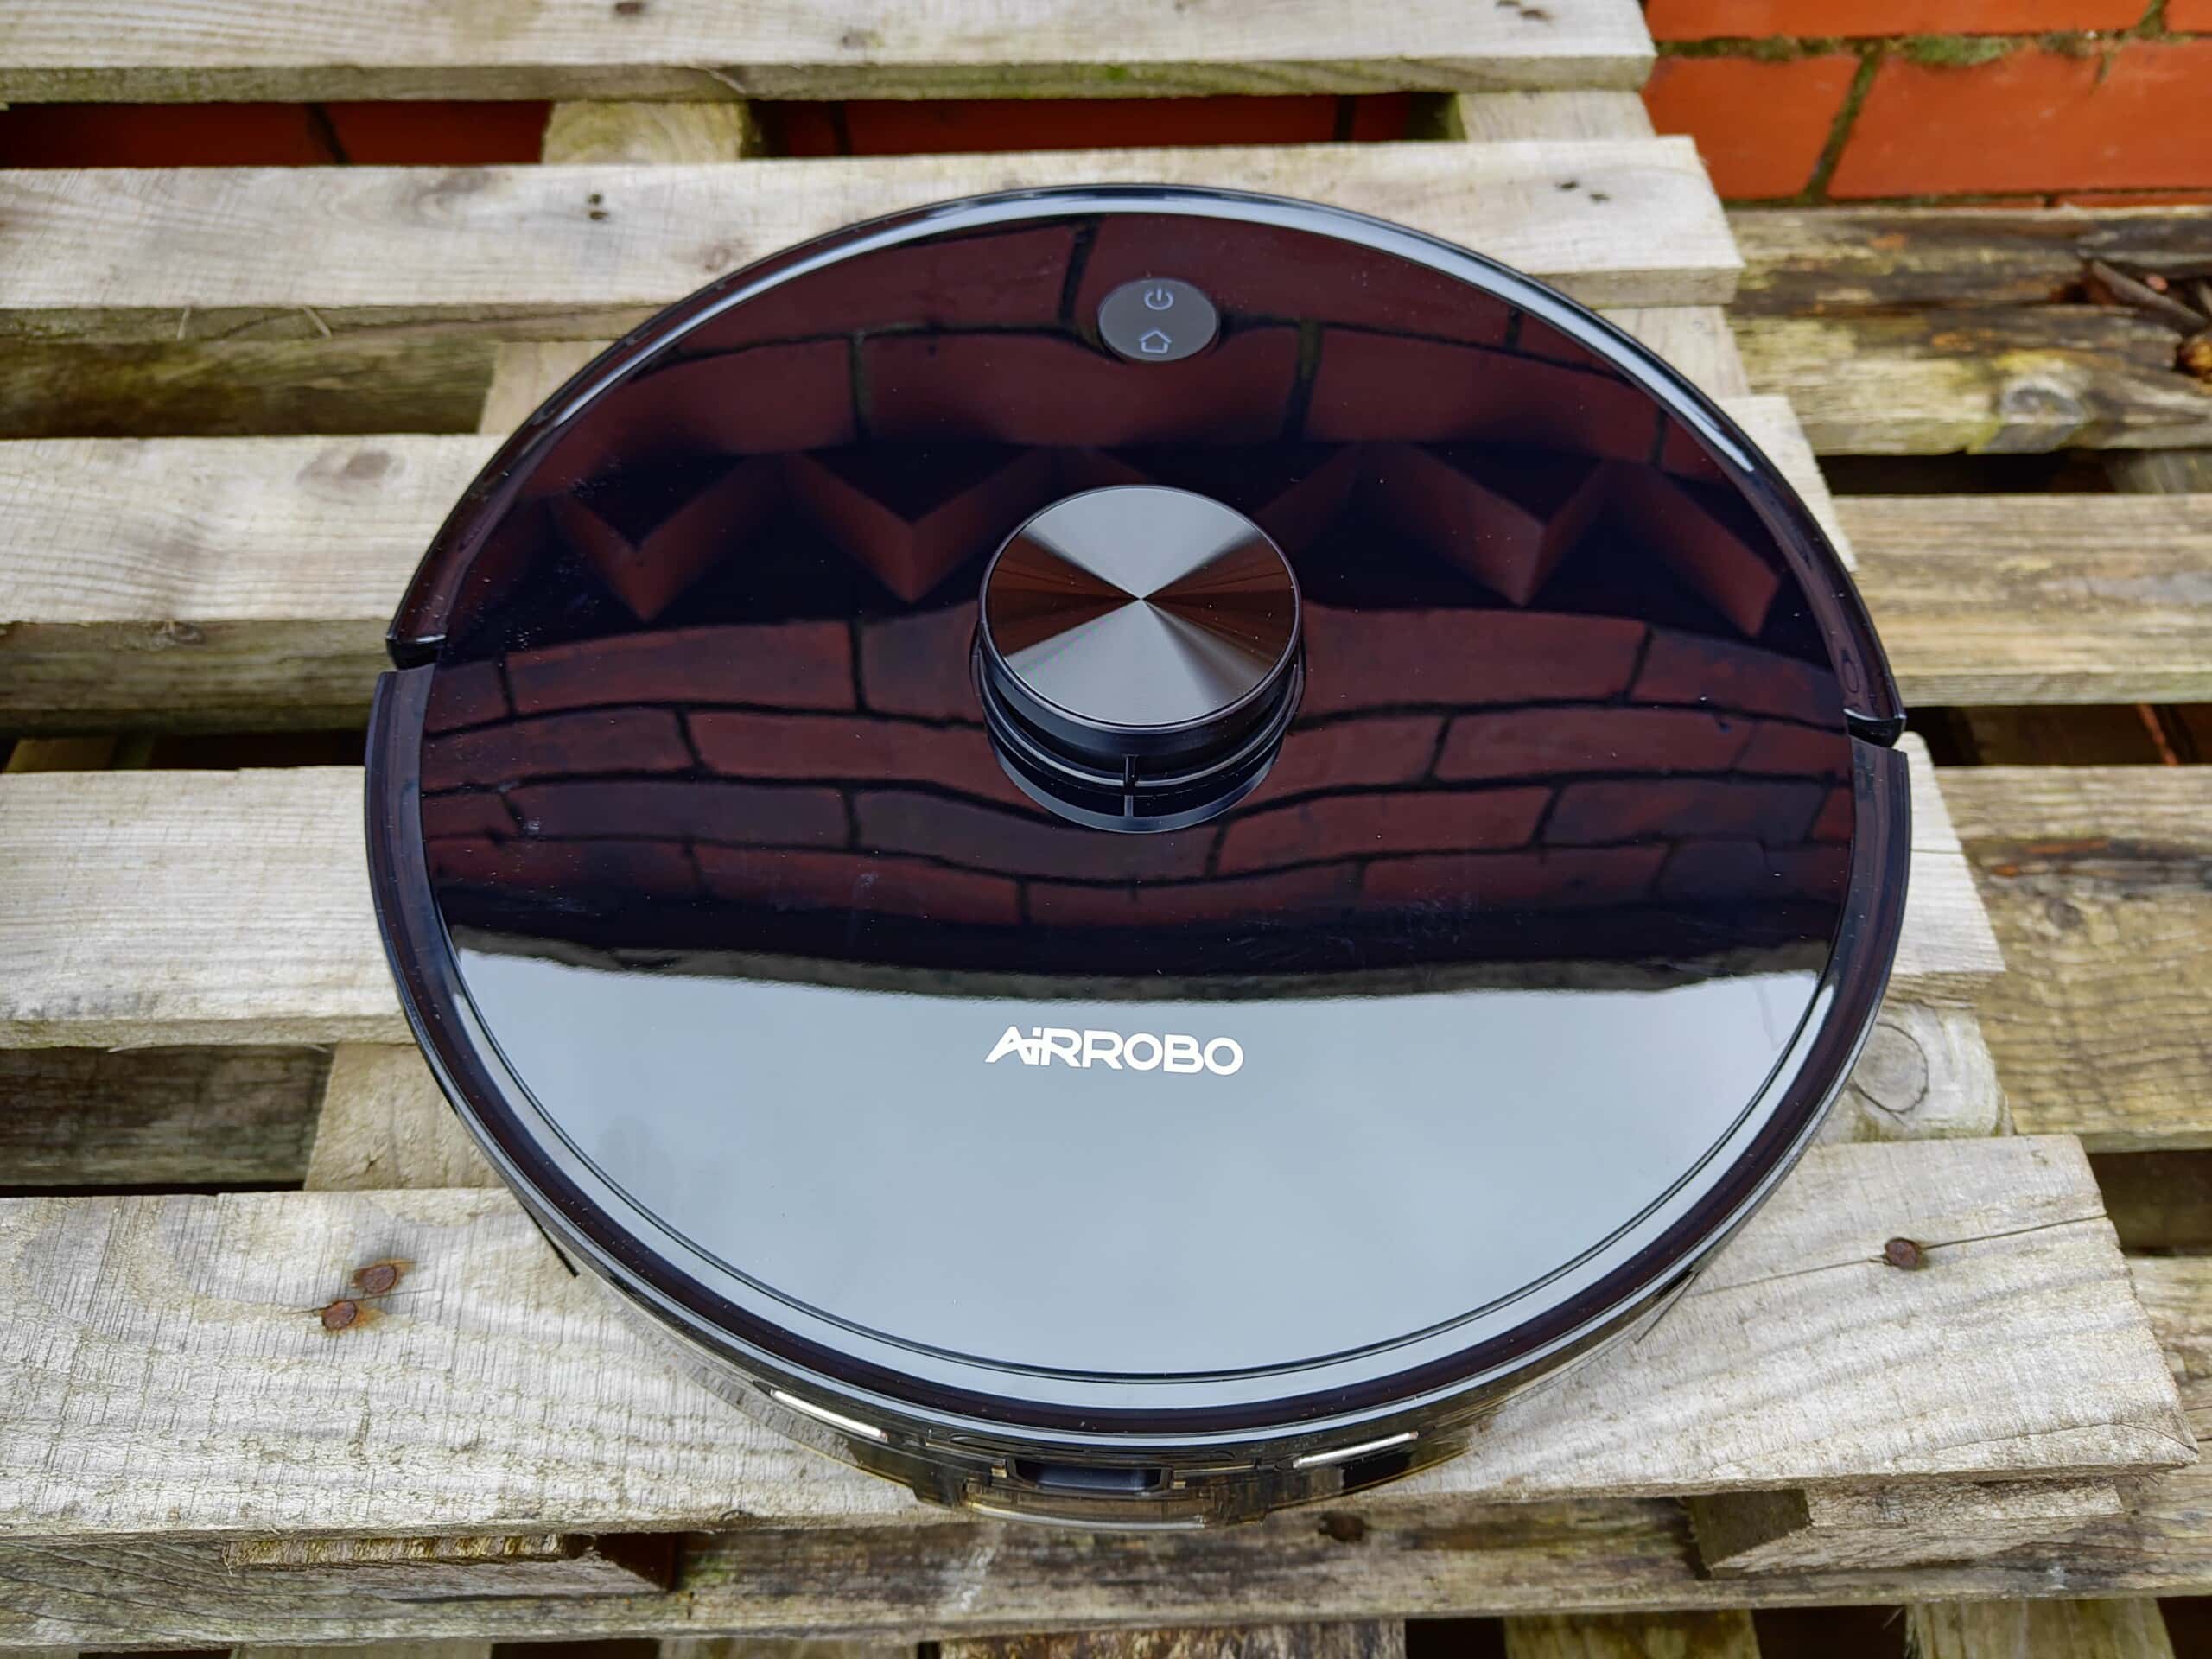 AIRROBO T10 plus self empty review3 scaled - AIRROBO T10+ Self-Empty Robot Vacuum & Mop Review - The cheapest self-emptying smart mapping vacuum on Amazon